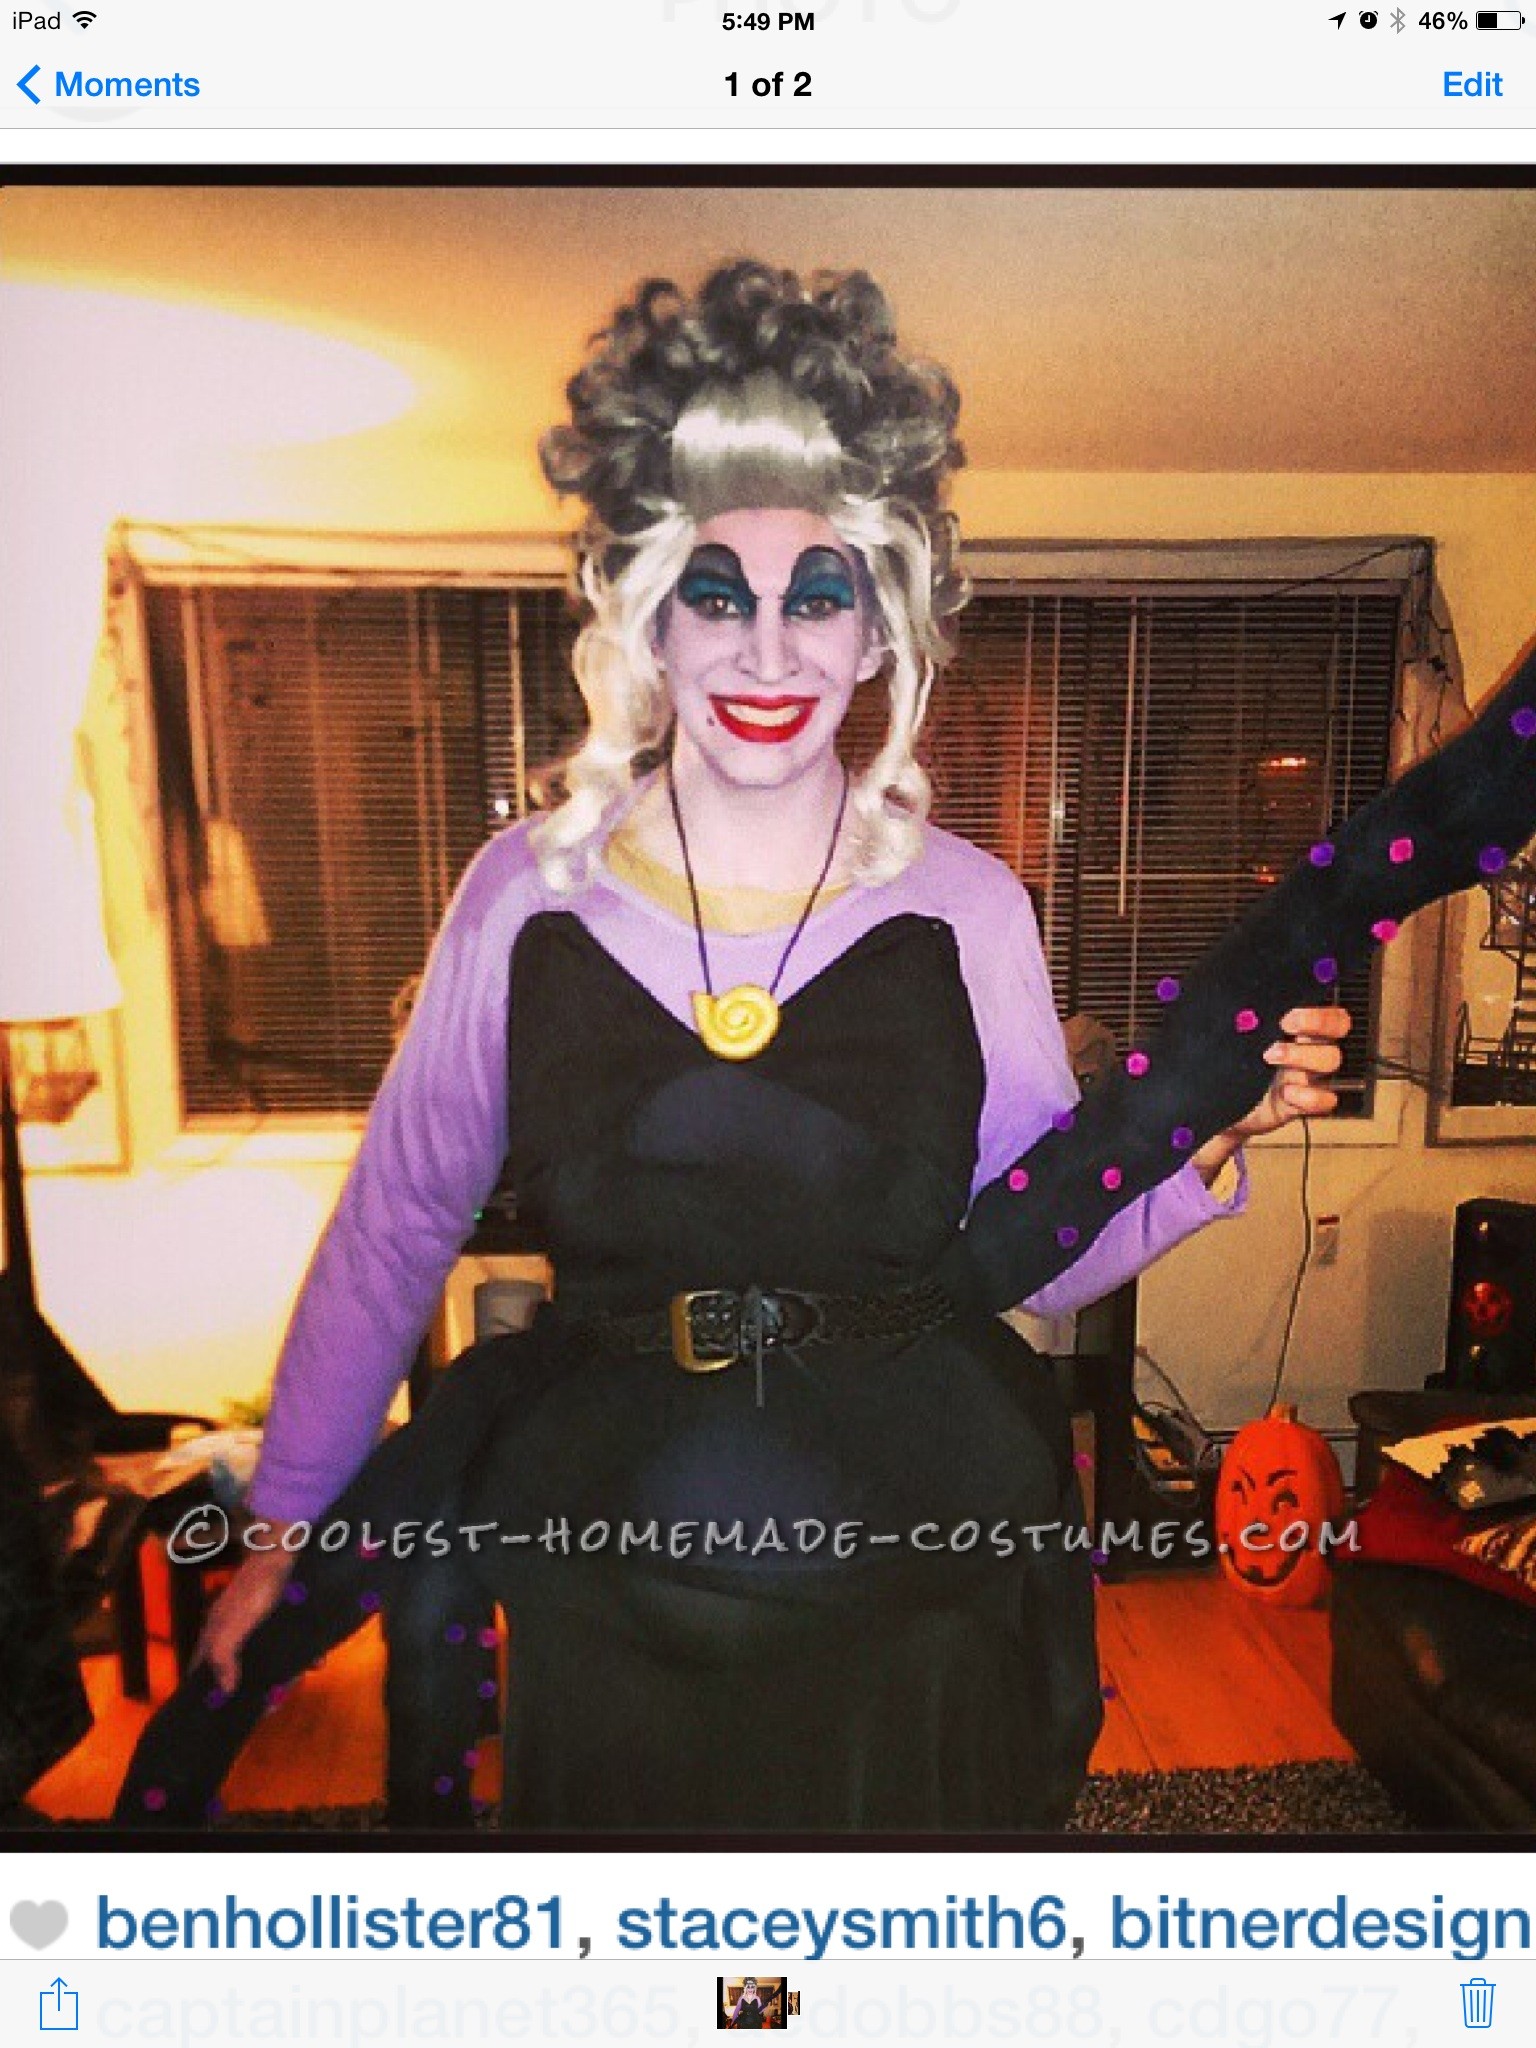 Cool Homemade Ursula the Sea Witch Costume